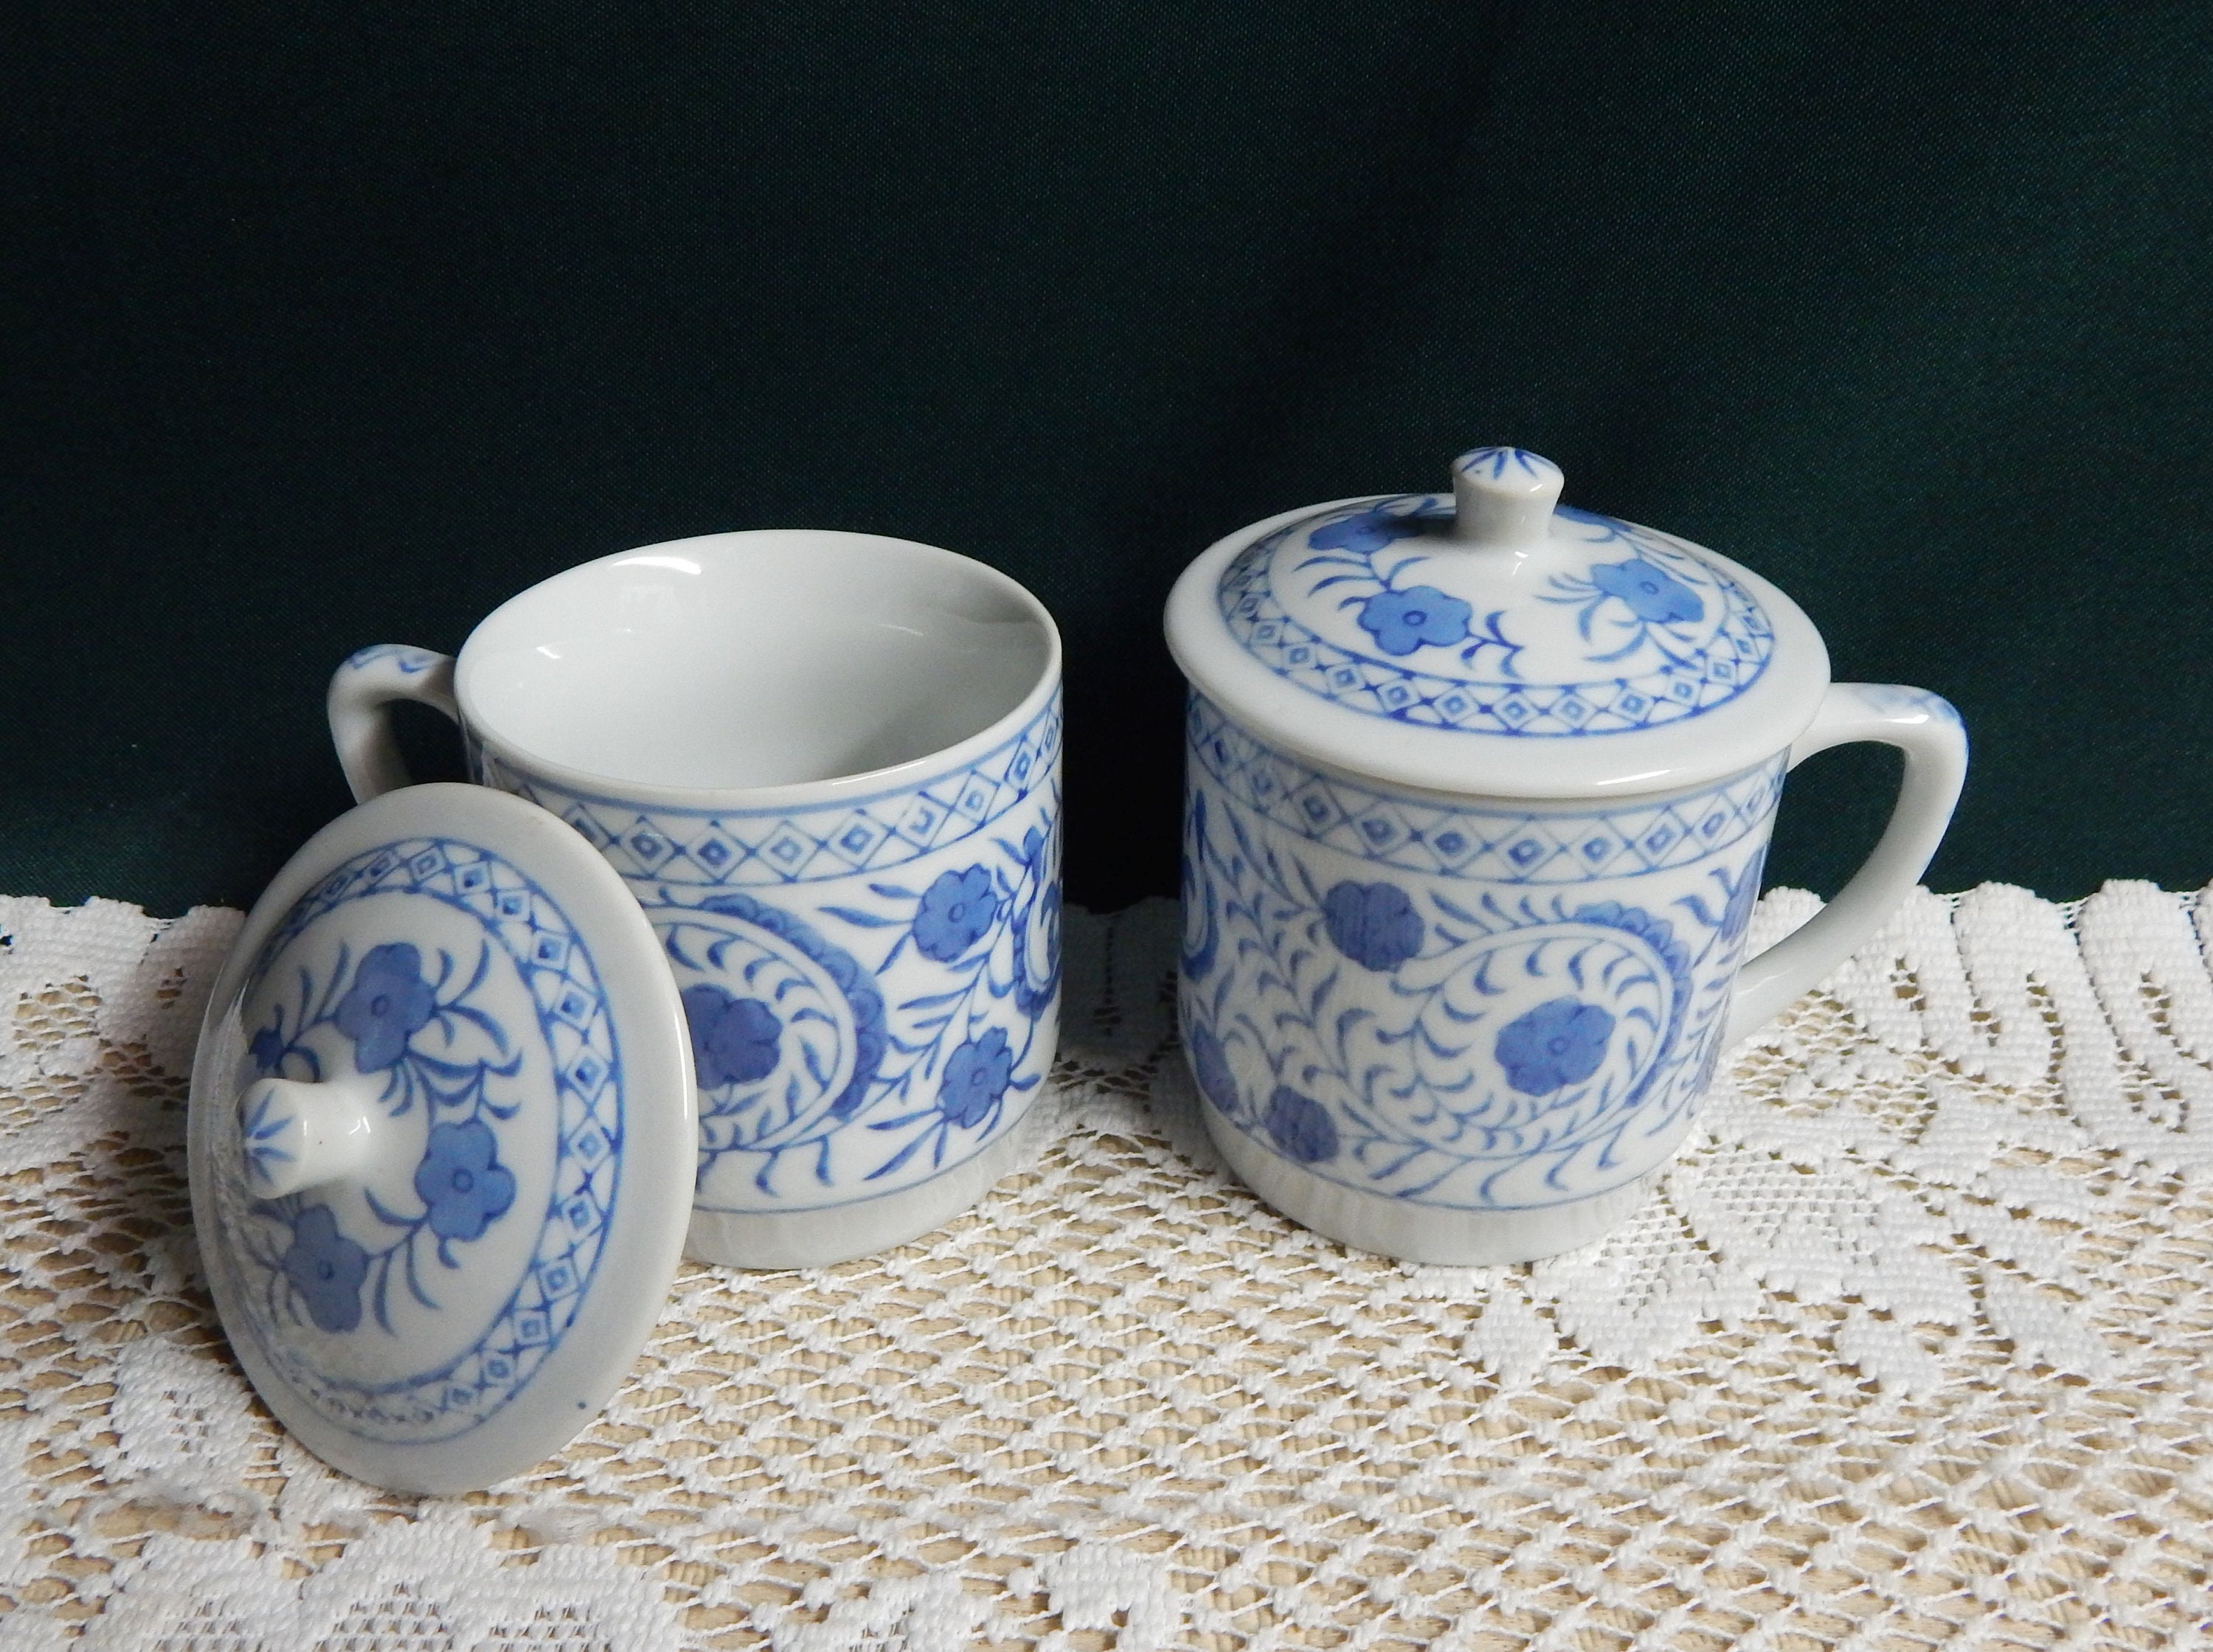 VTG Williams Sonoma Brasserie Blue Banded Porcelain Coffee Tea Cup and  Saucer